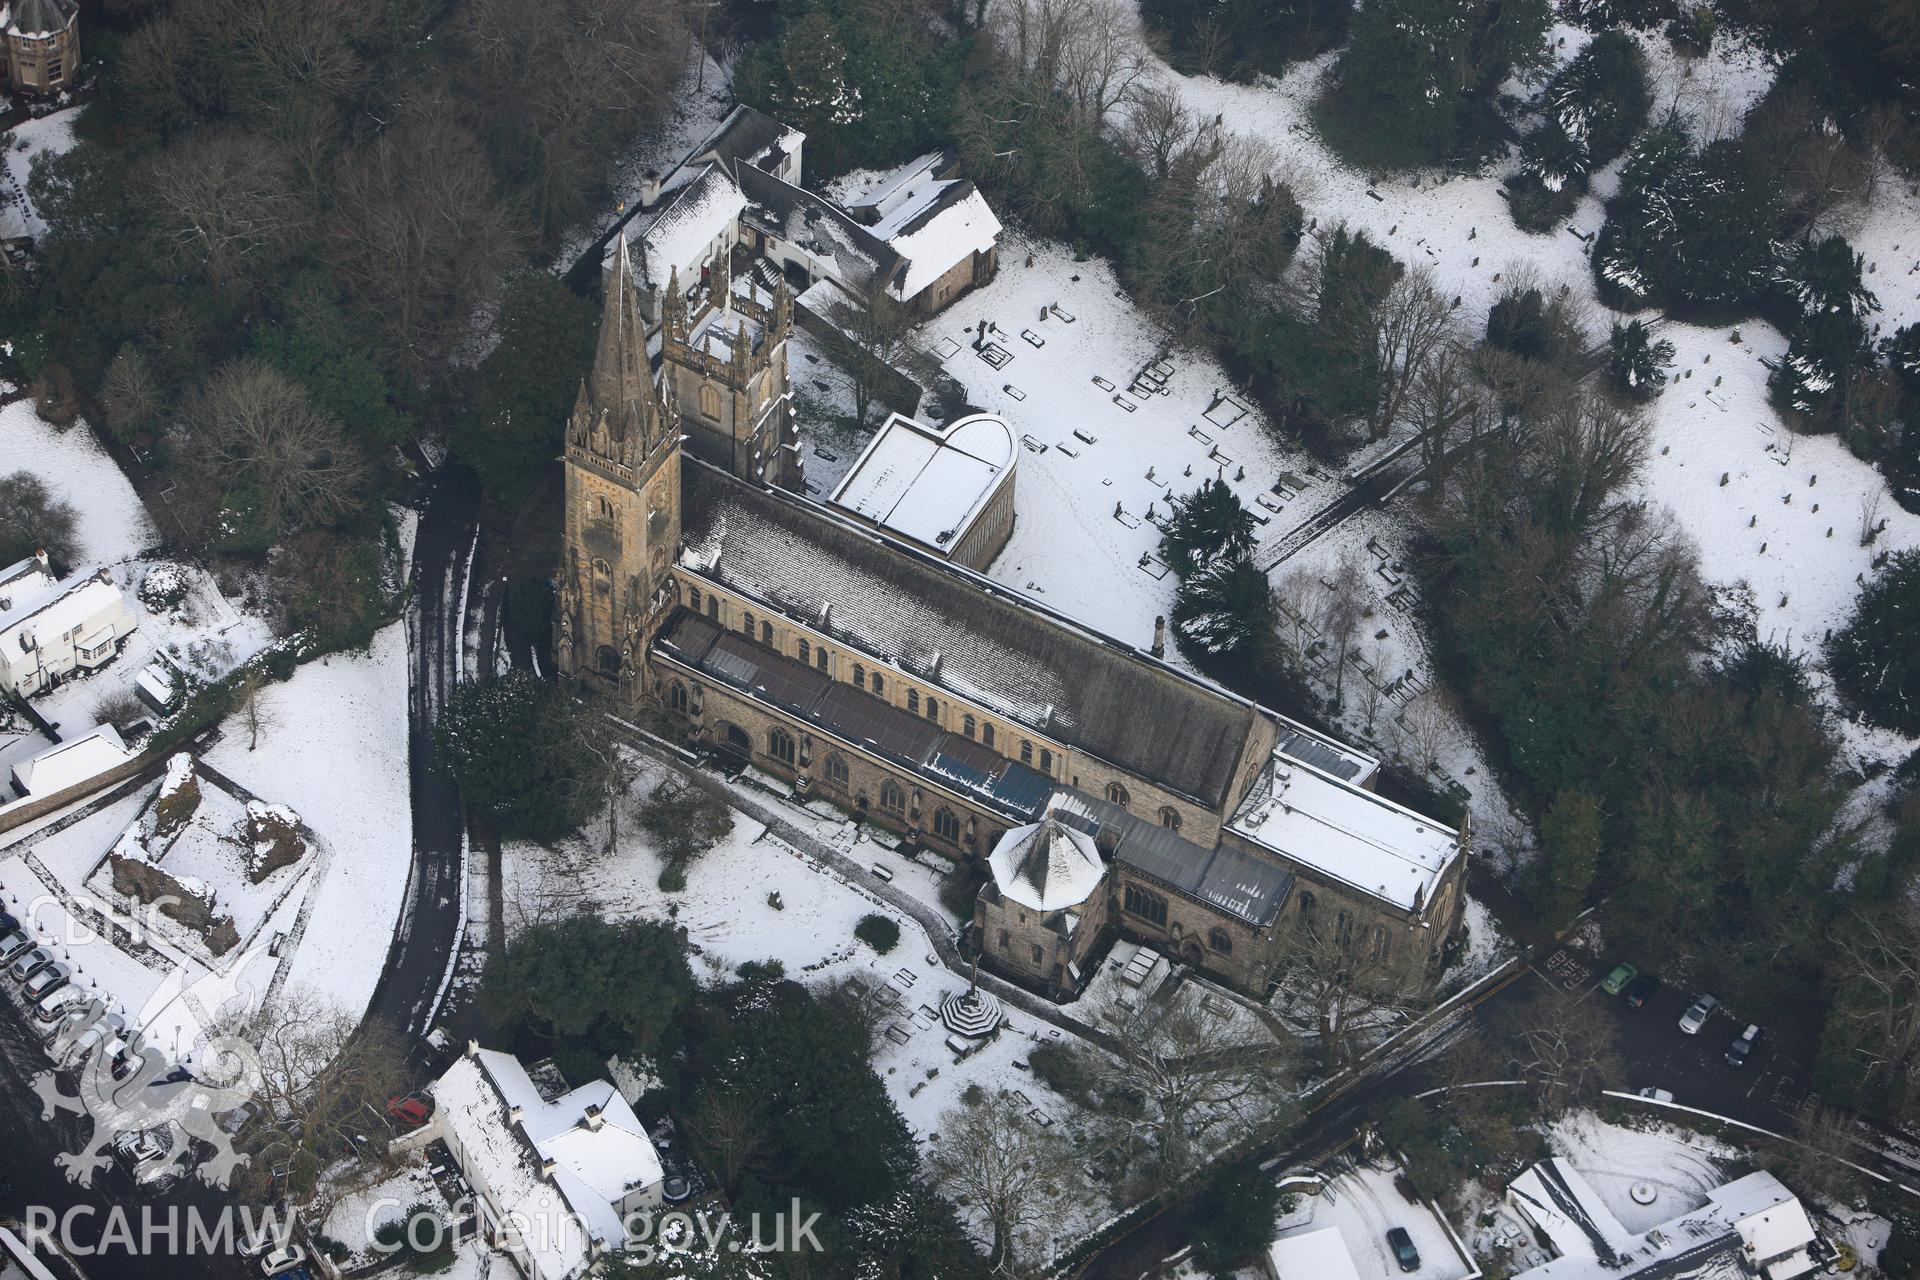 Llandaff Cathedral, Llandaff Cathedral bell tower and the Old Choir college, Llandaff, Cardiff. Oblique aerial photograph taken during the Royal Commission?s programme of archaeological aerial reconnaissance by Toby Driver on 24th January 2013.